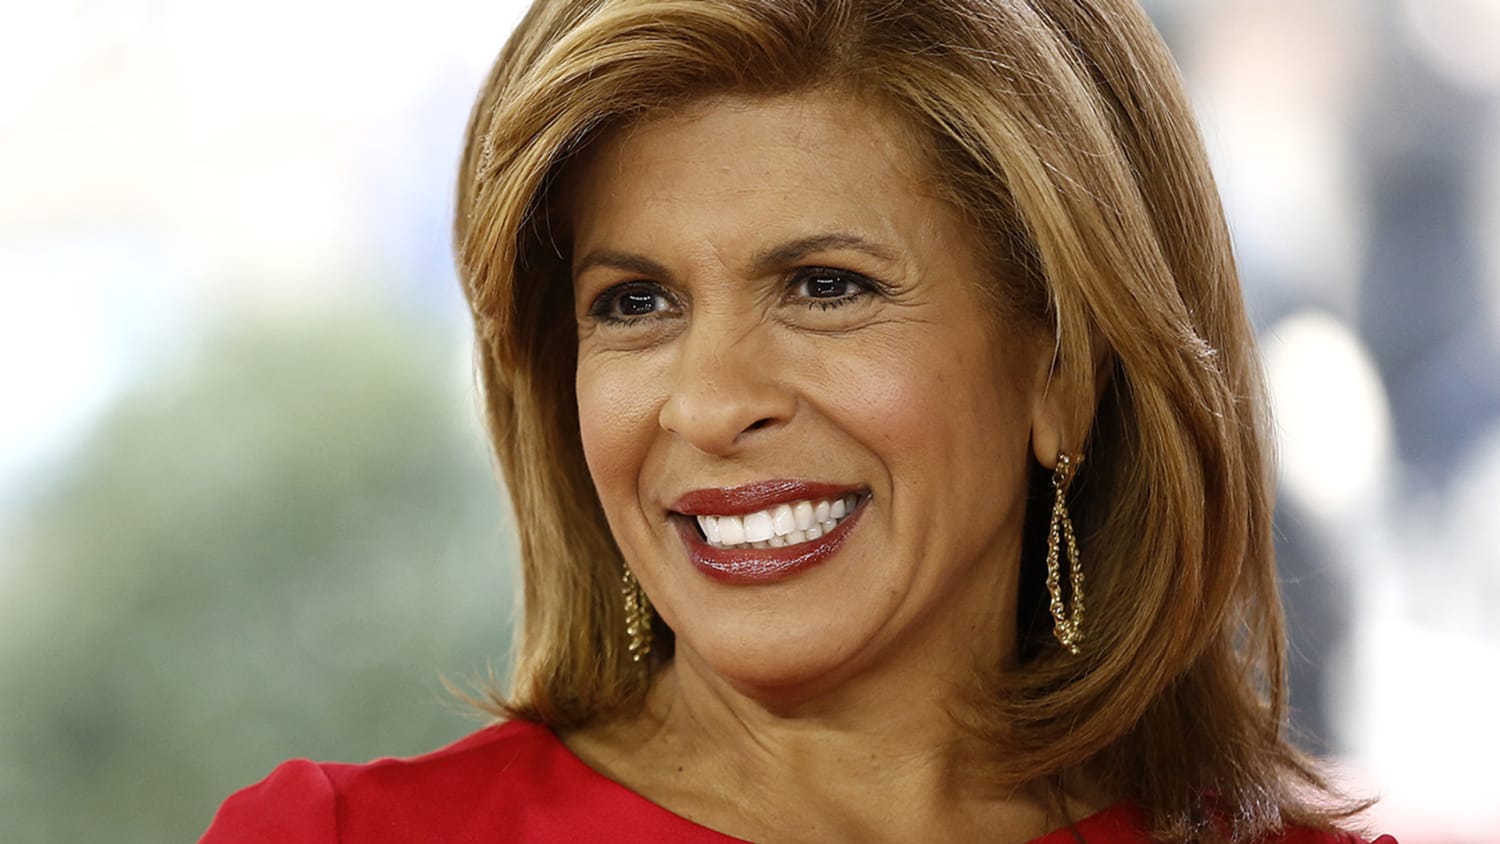 Hoda Kotb to release new book, 'Where They Belong' .